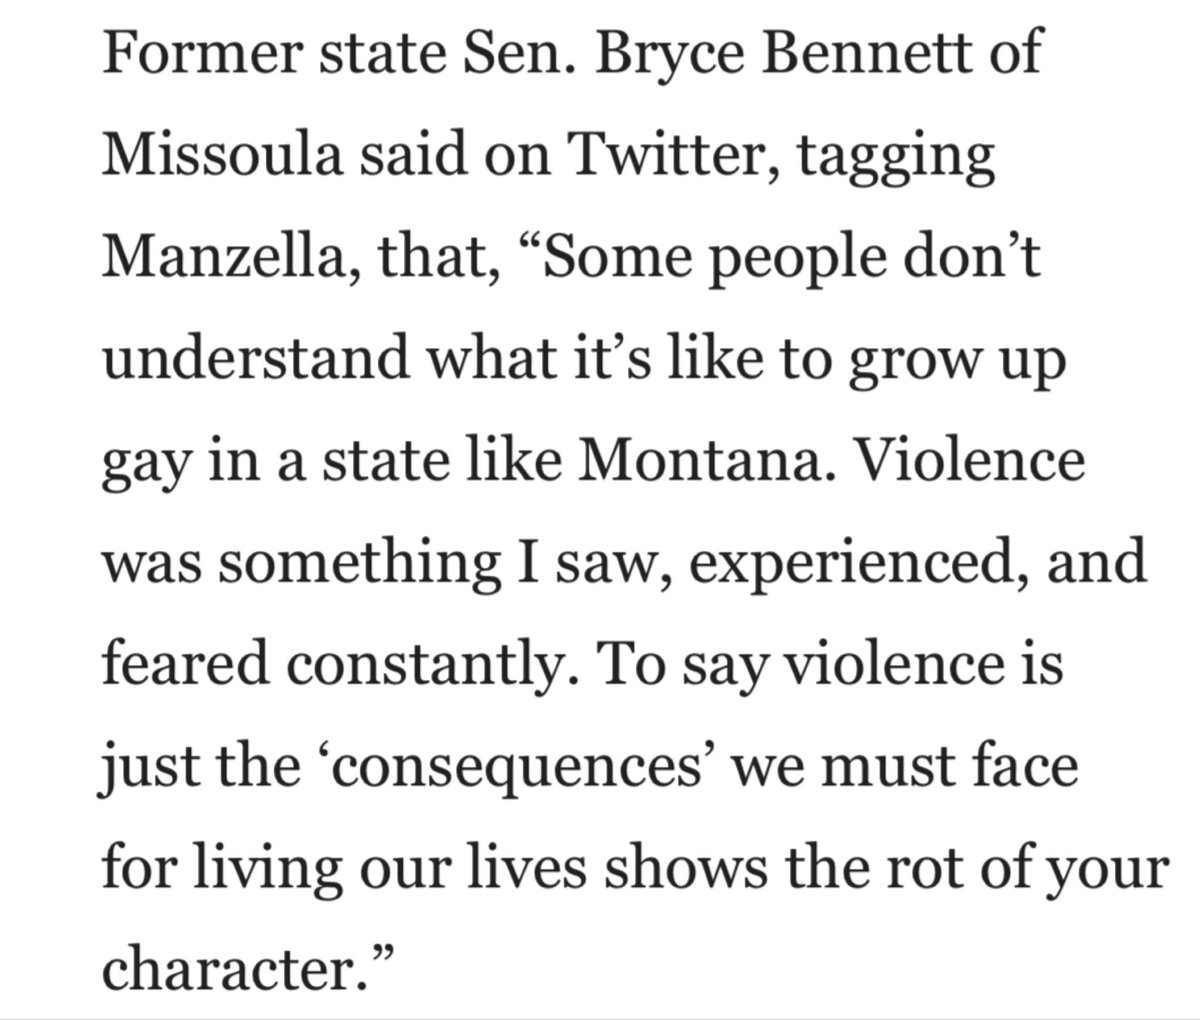 What .@brycebennett said. Has there been any, any, consequences for poor behavior from Montana GOP elected officials?  #MtPol  #MtNews They’re normalizing violence. Especially Montana’s .@MTAGKnudsen Top Law enforcement officer.